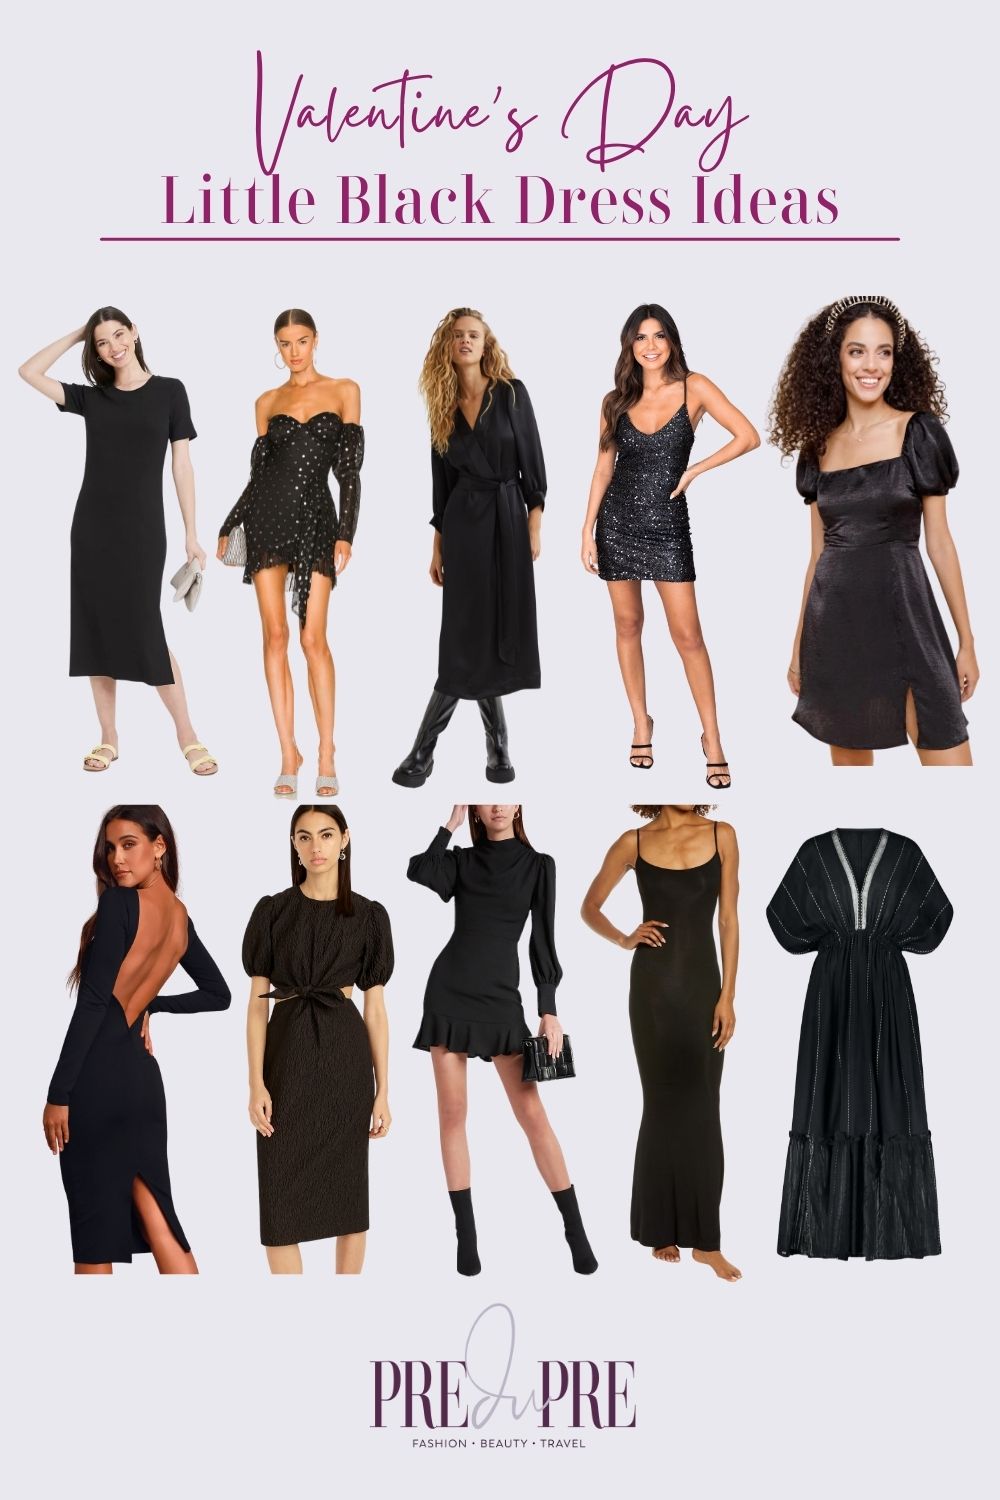 Collage of different kinds of black dresses for Valentine's Day.